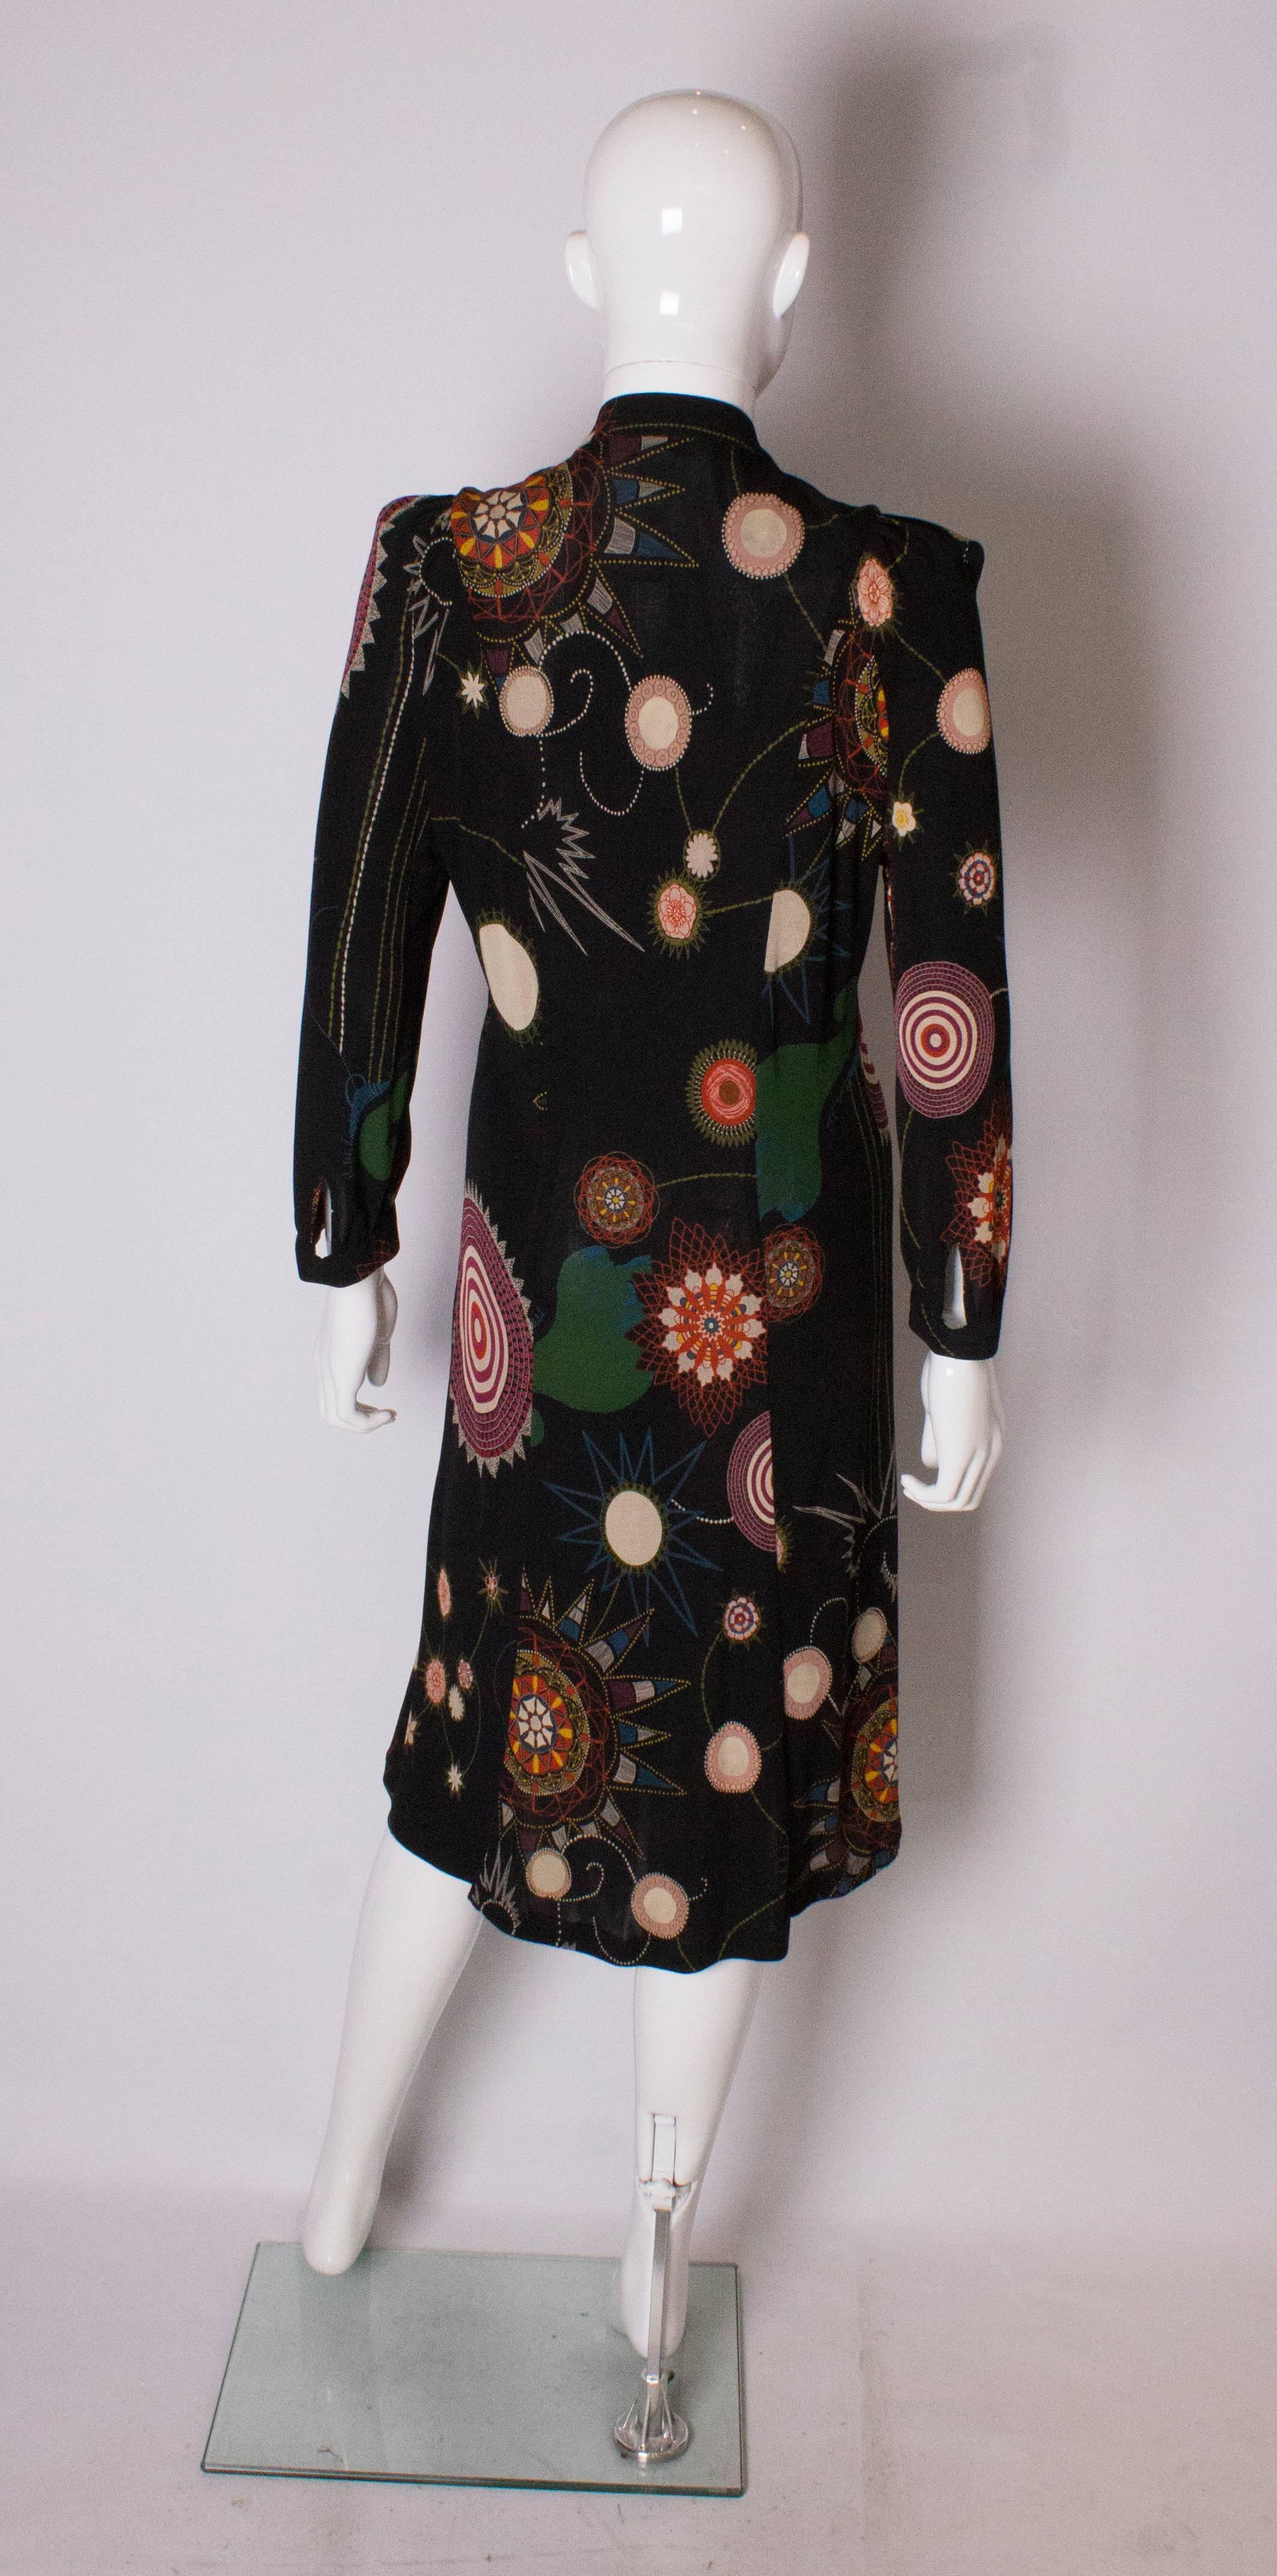 A Vintage 2000 printed  Dress by Christian Lacroix 2